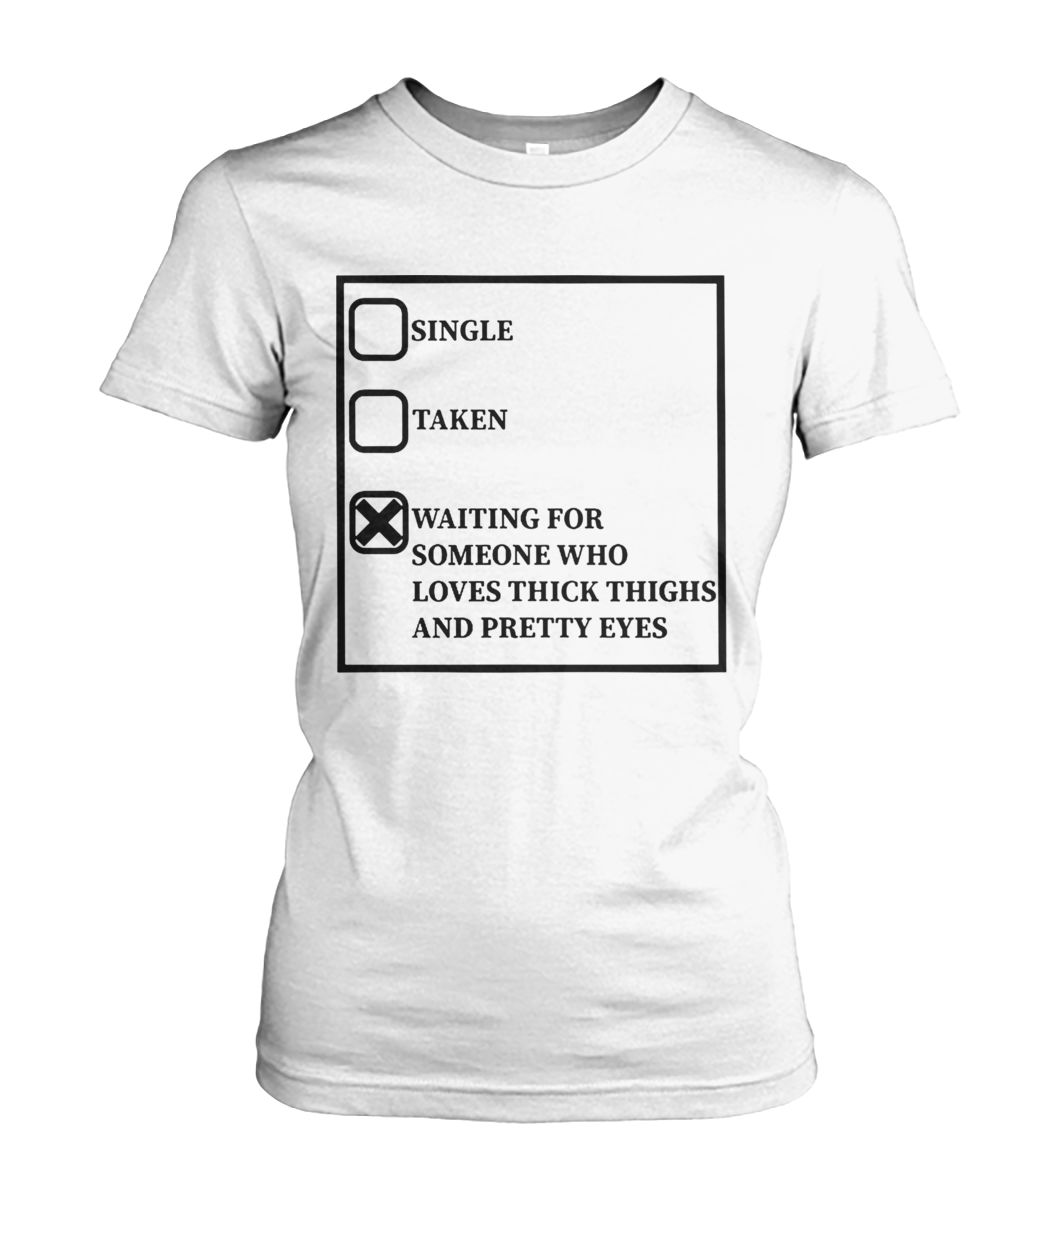 Single taken waiting for someone who loves thick thighs and pretty eyes women's crew tee